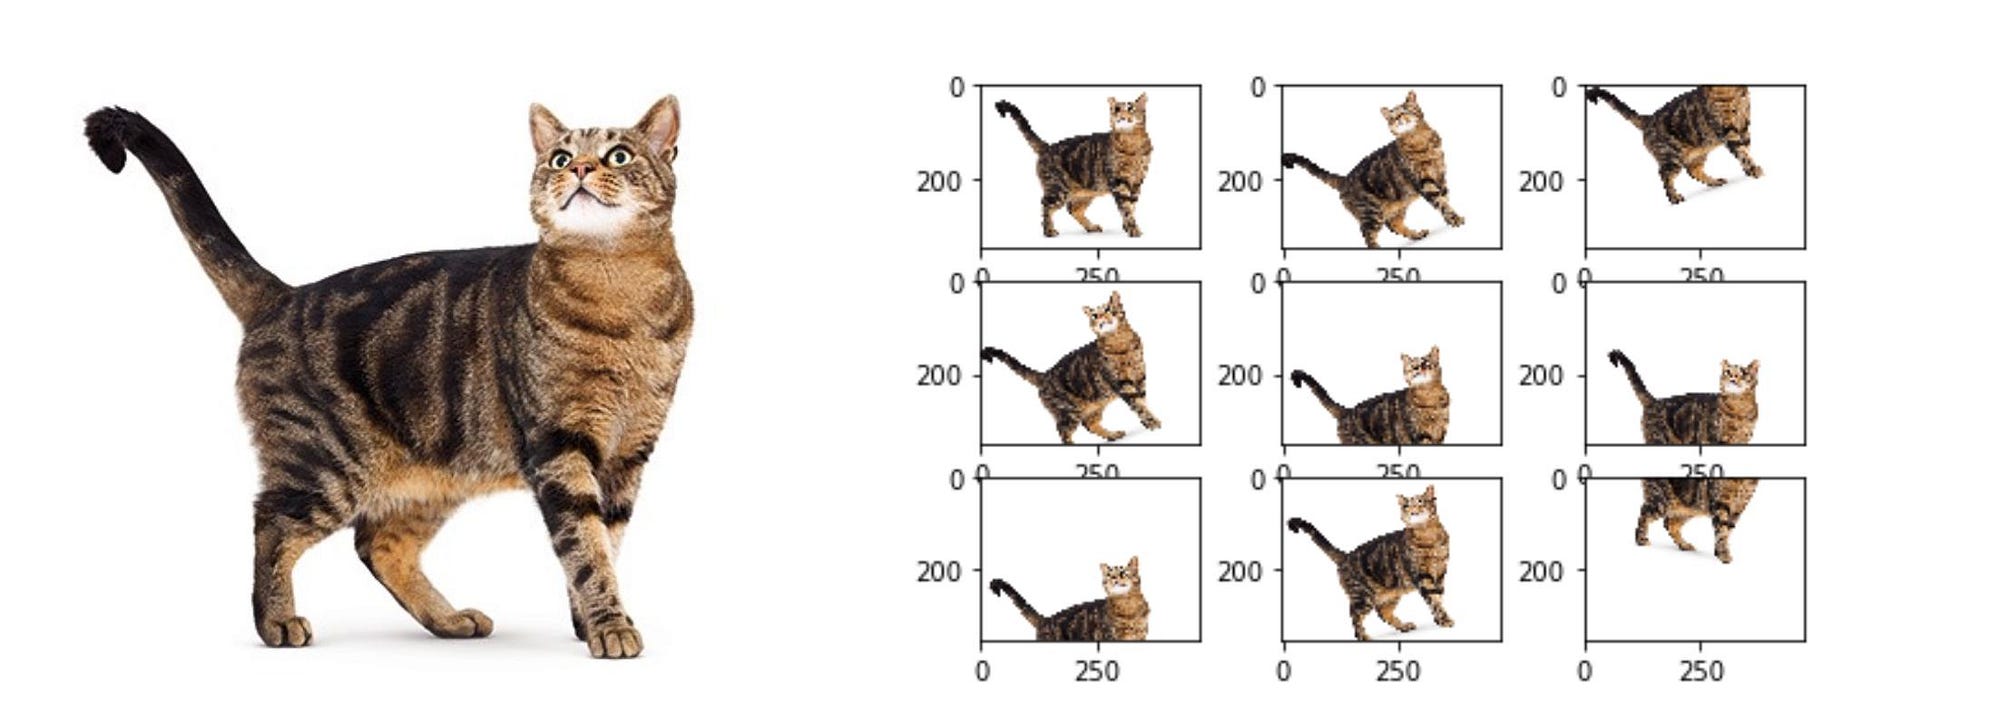 The 4 Convolutional Neural Network Models That Can Classify Your